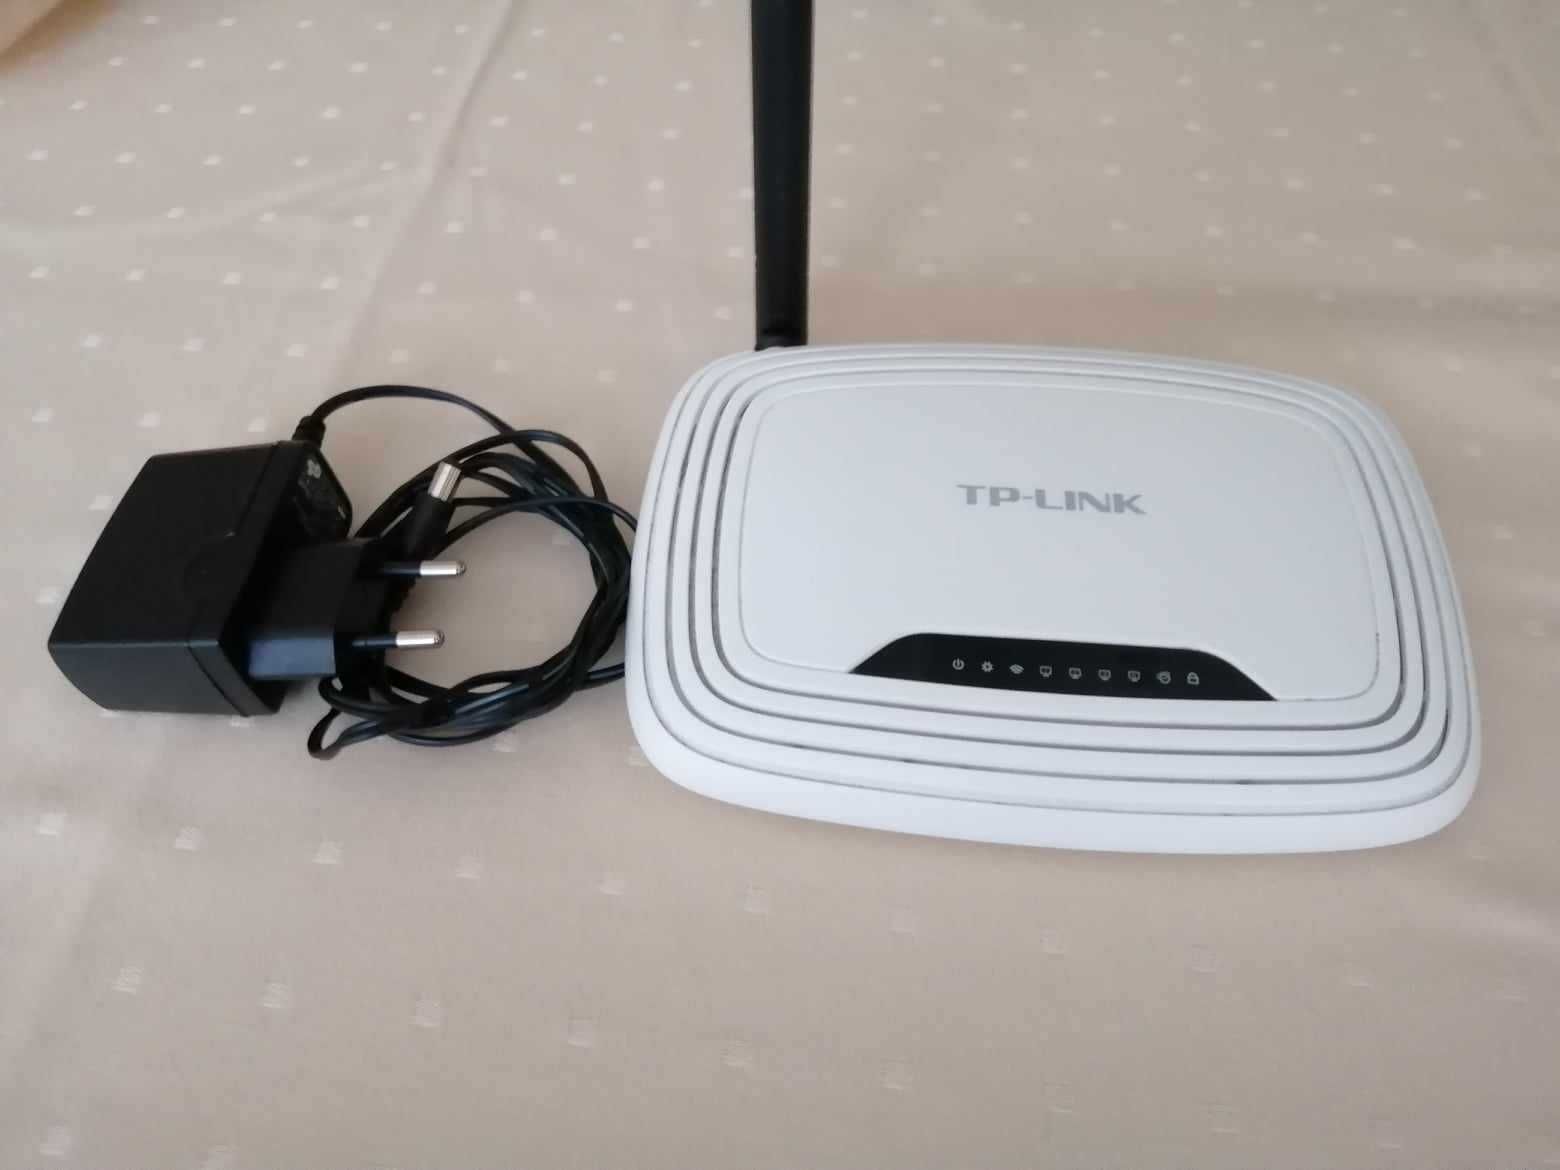 Router wi-fi TP-LINK tl-wr740n